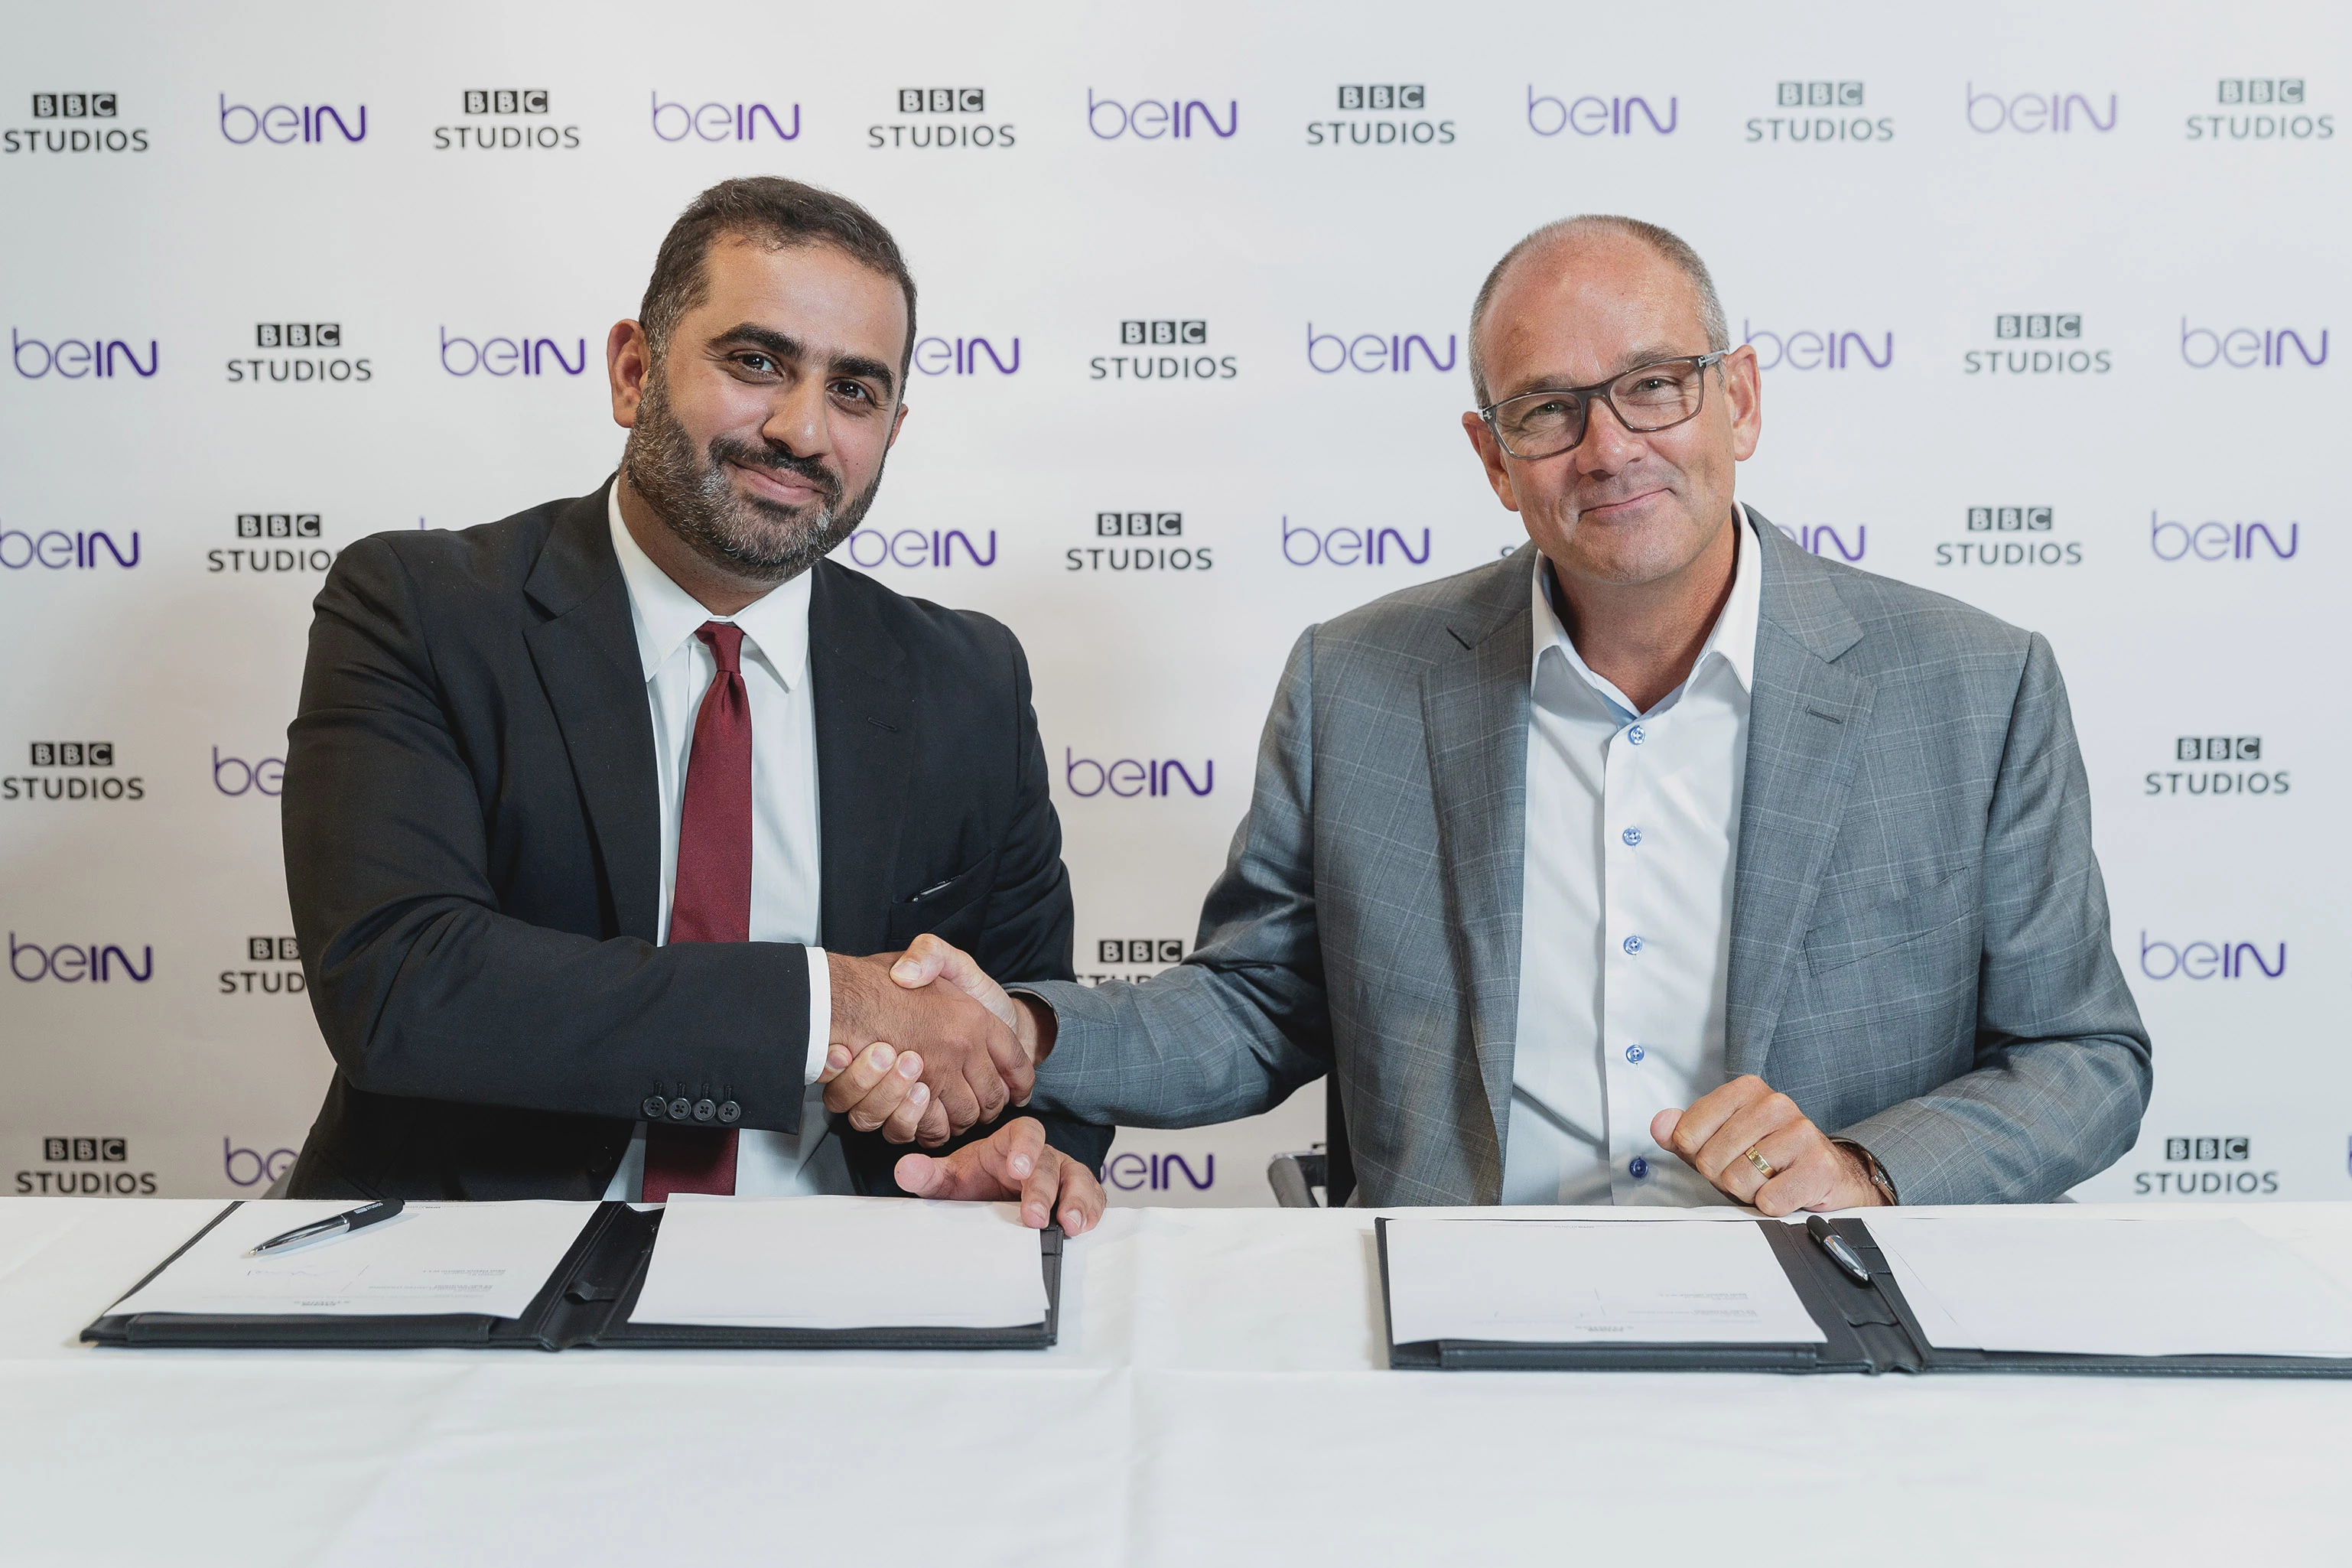 Paul Dempsey, President for Global Markets at BBC Studios, and Yousef Al-Obaidly, Deputy Chief Executive Officer of beIN MEDIA GROUP